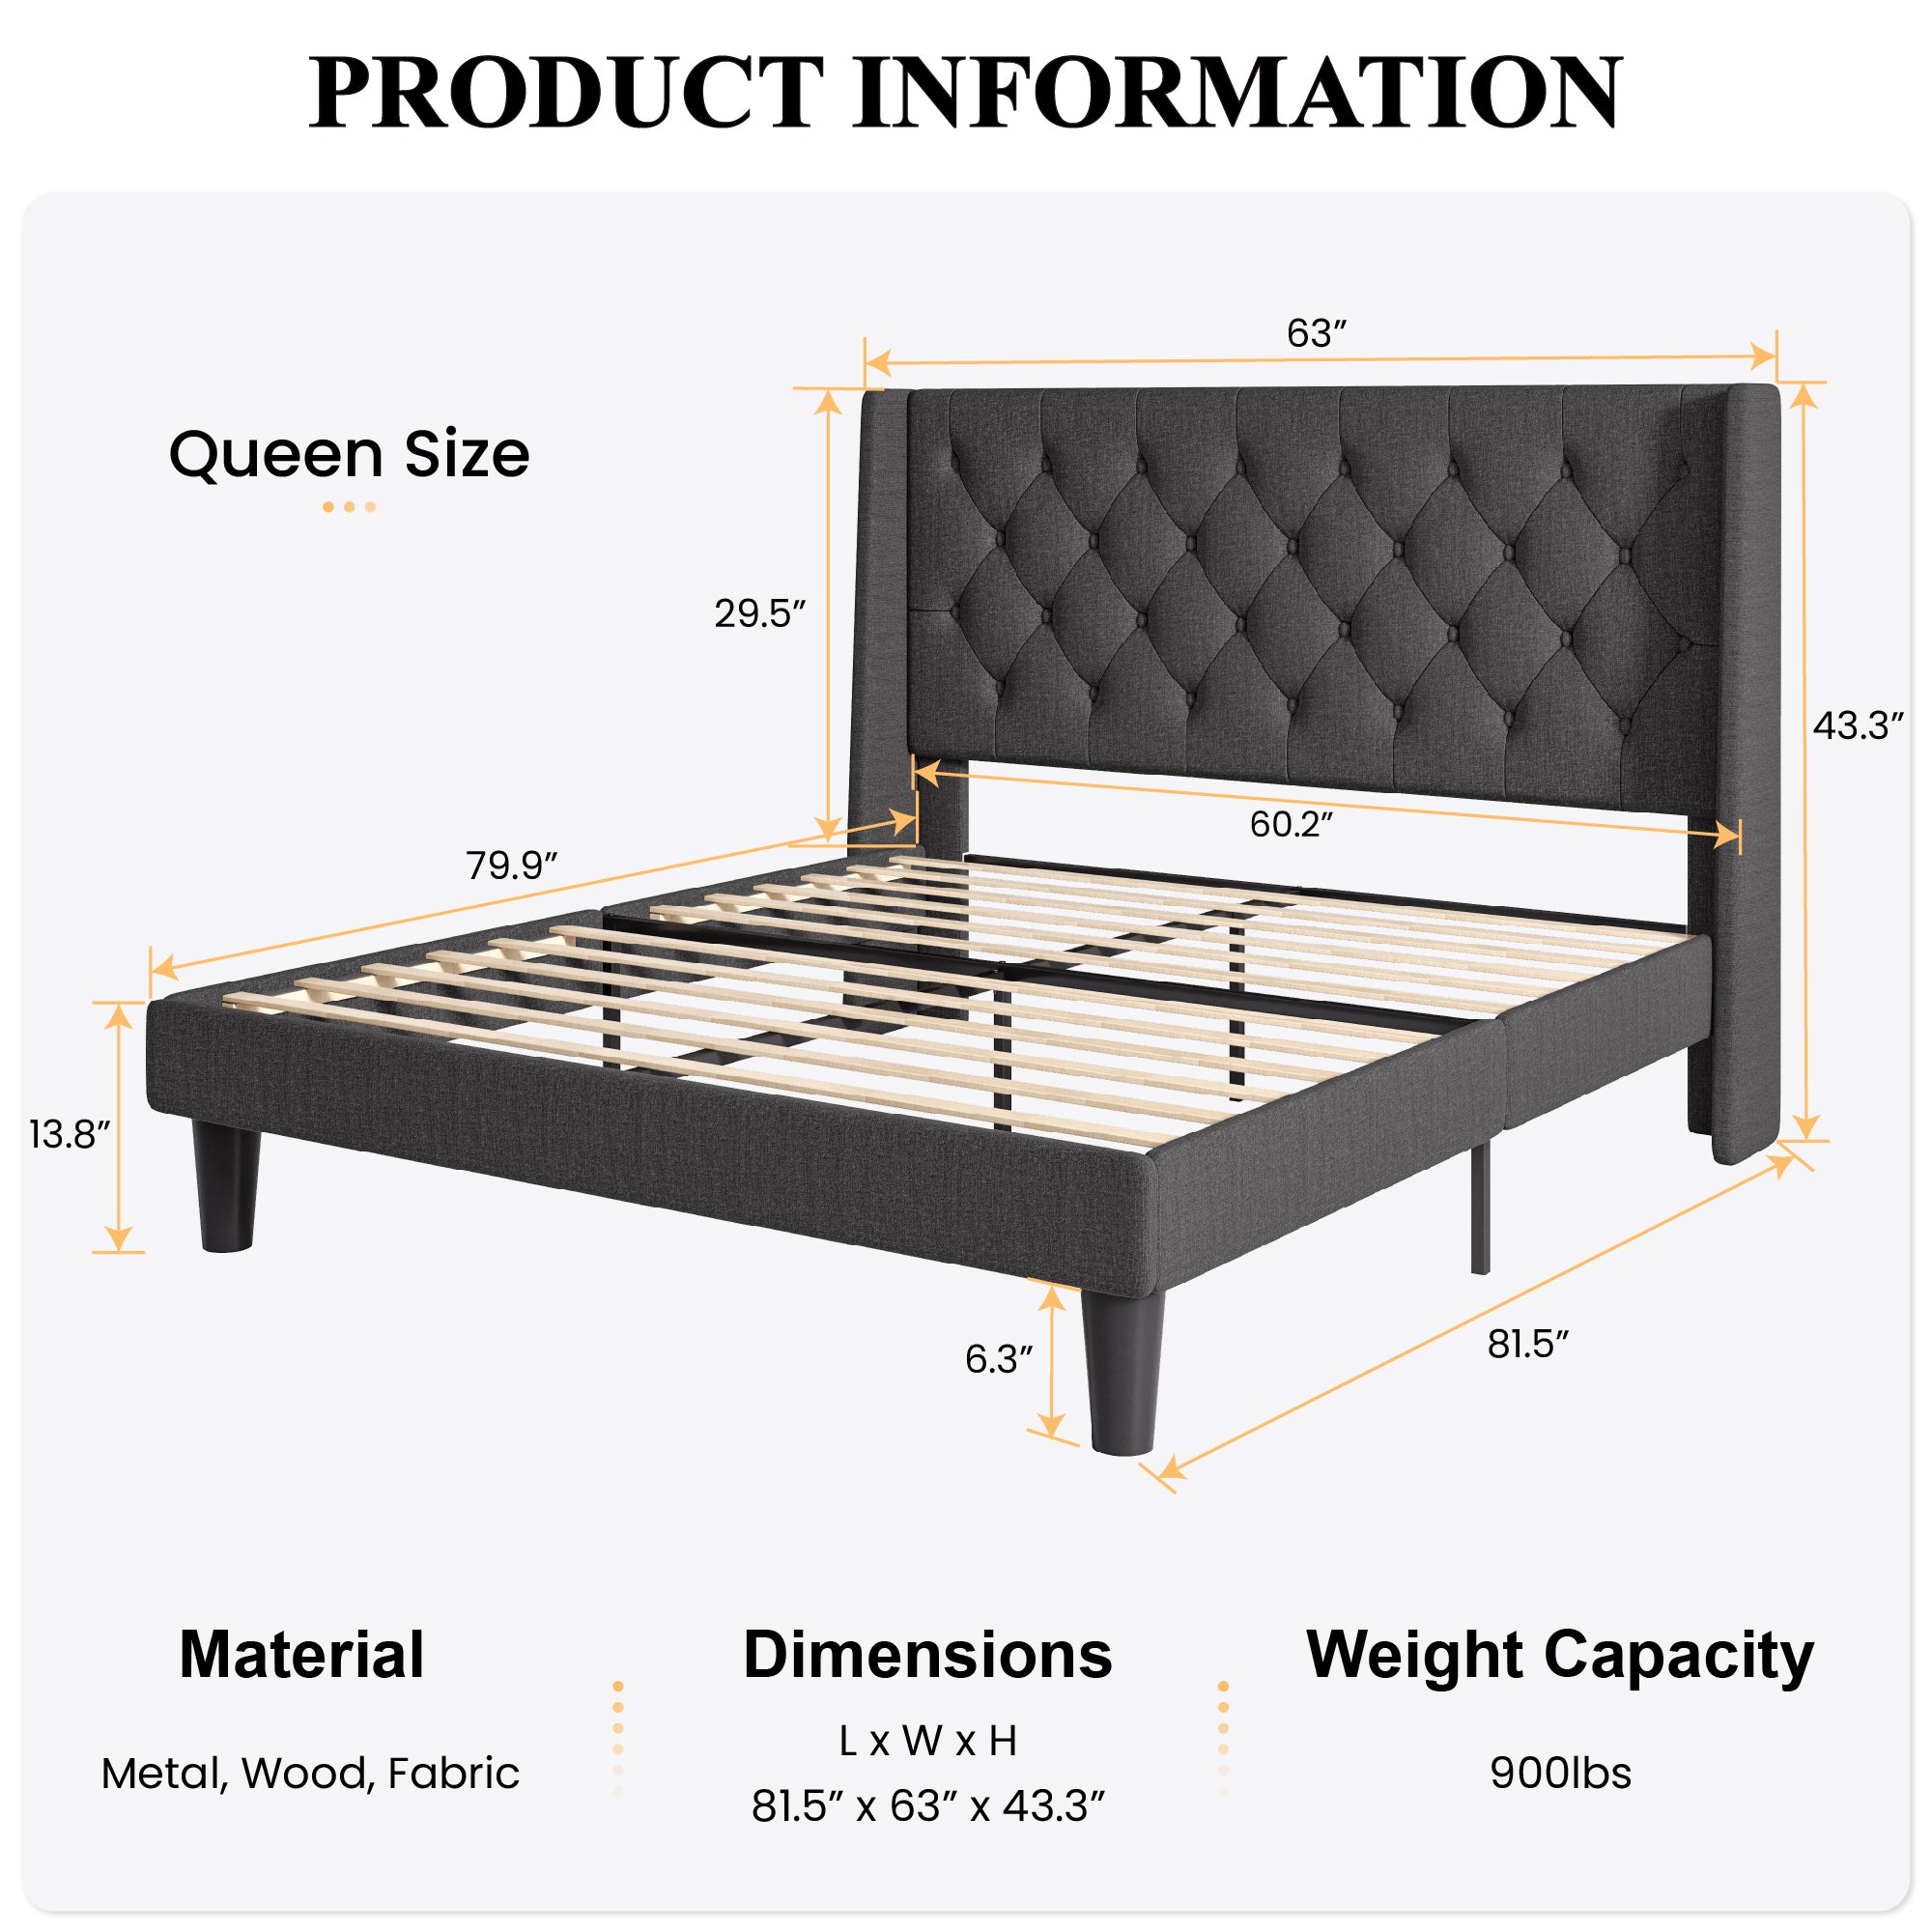 Platform Bed Frame with Upholstered Headboard and Wingback, Button Tufted Design